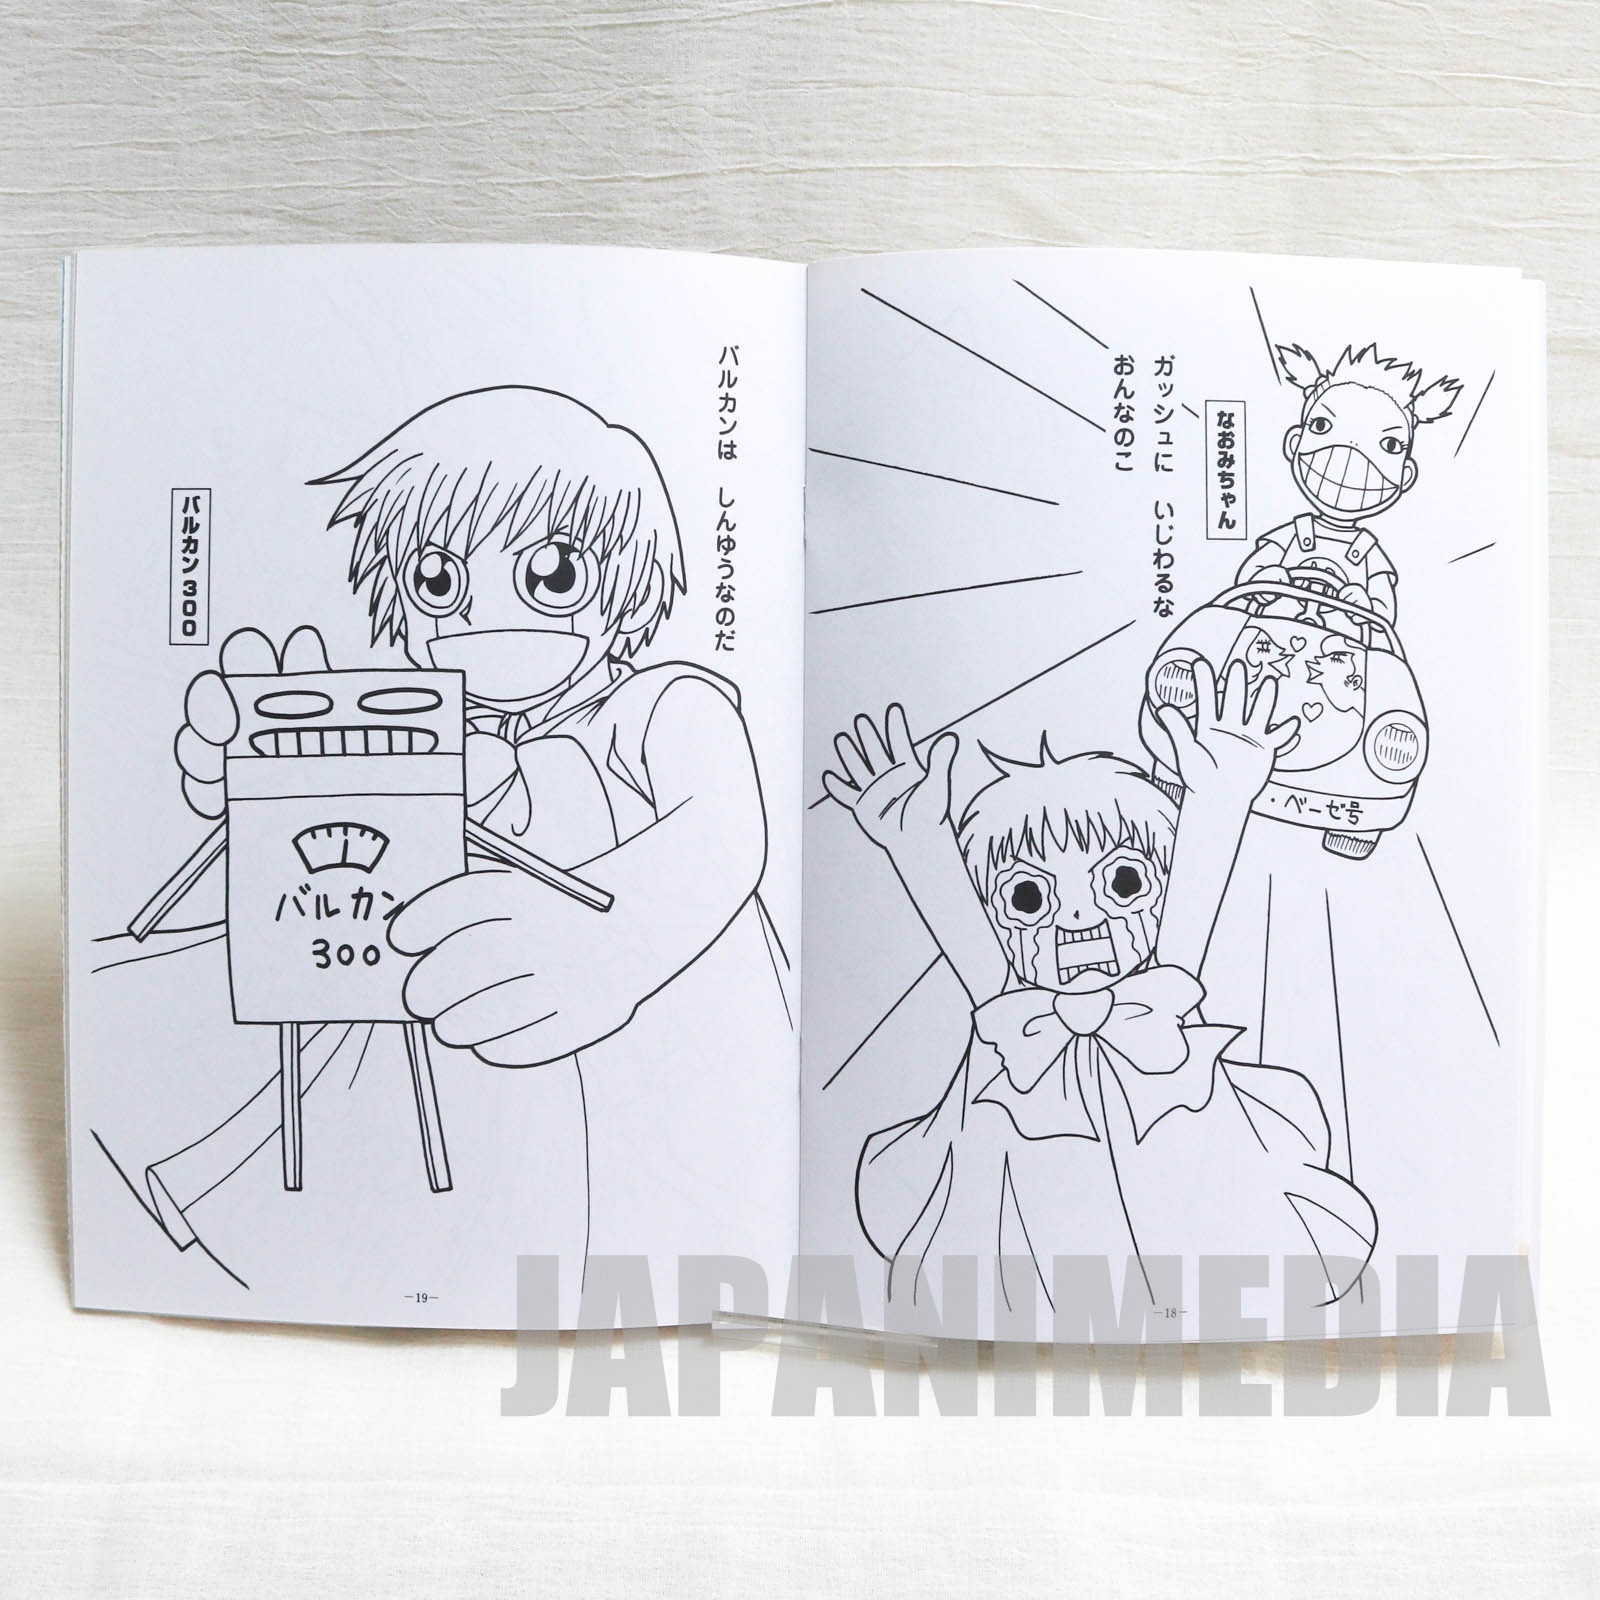 Zatch Bell! Drawing for Coloring‐in Book JAPAN ANIME